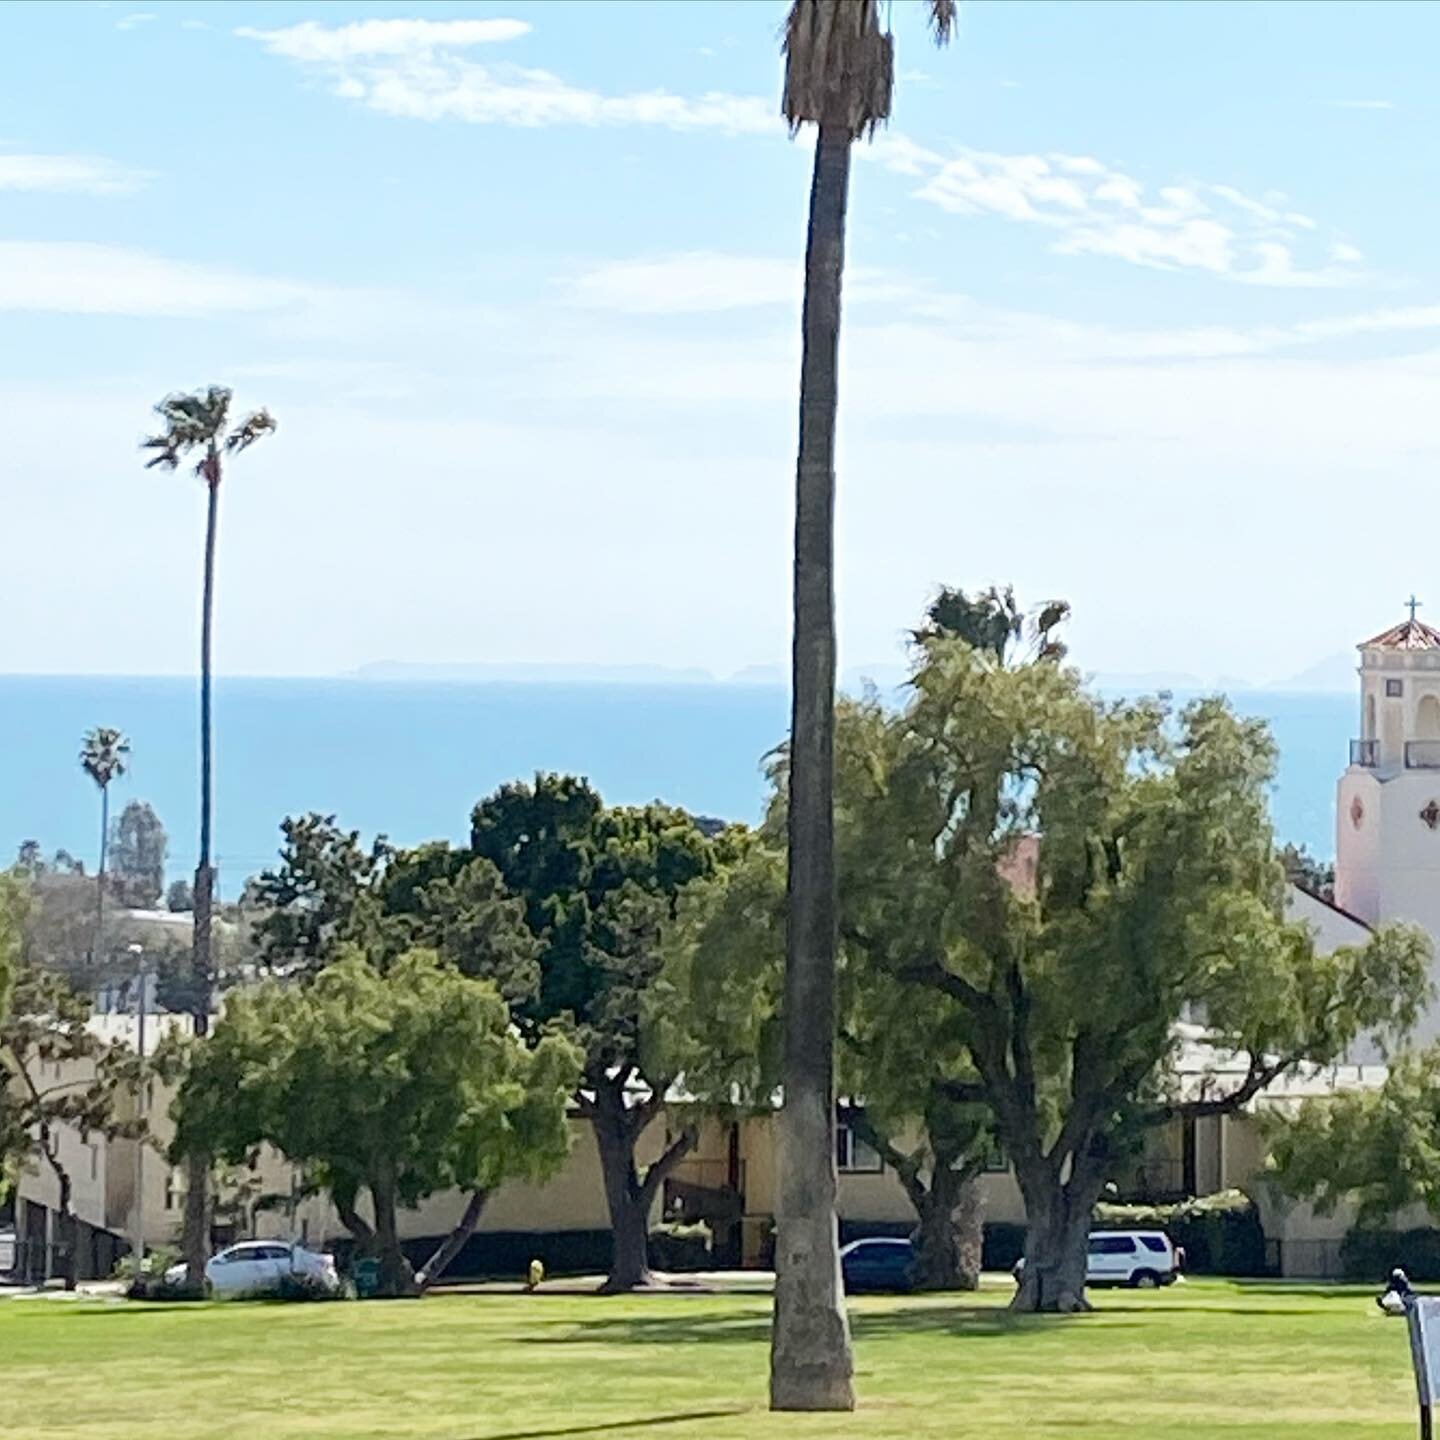 It&rsquo;s a beautiful day for inspections...I&rsquo;m going to miss getting to enjoy this view! #ventura #venturarealestate #venturabeach #dreamhome #shanoahcurranhomes #livsothebysventura